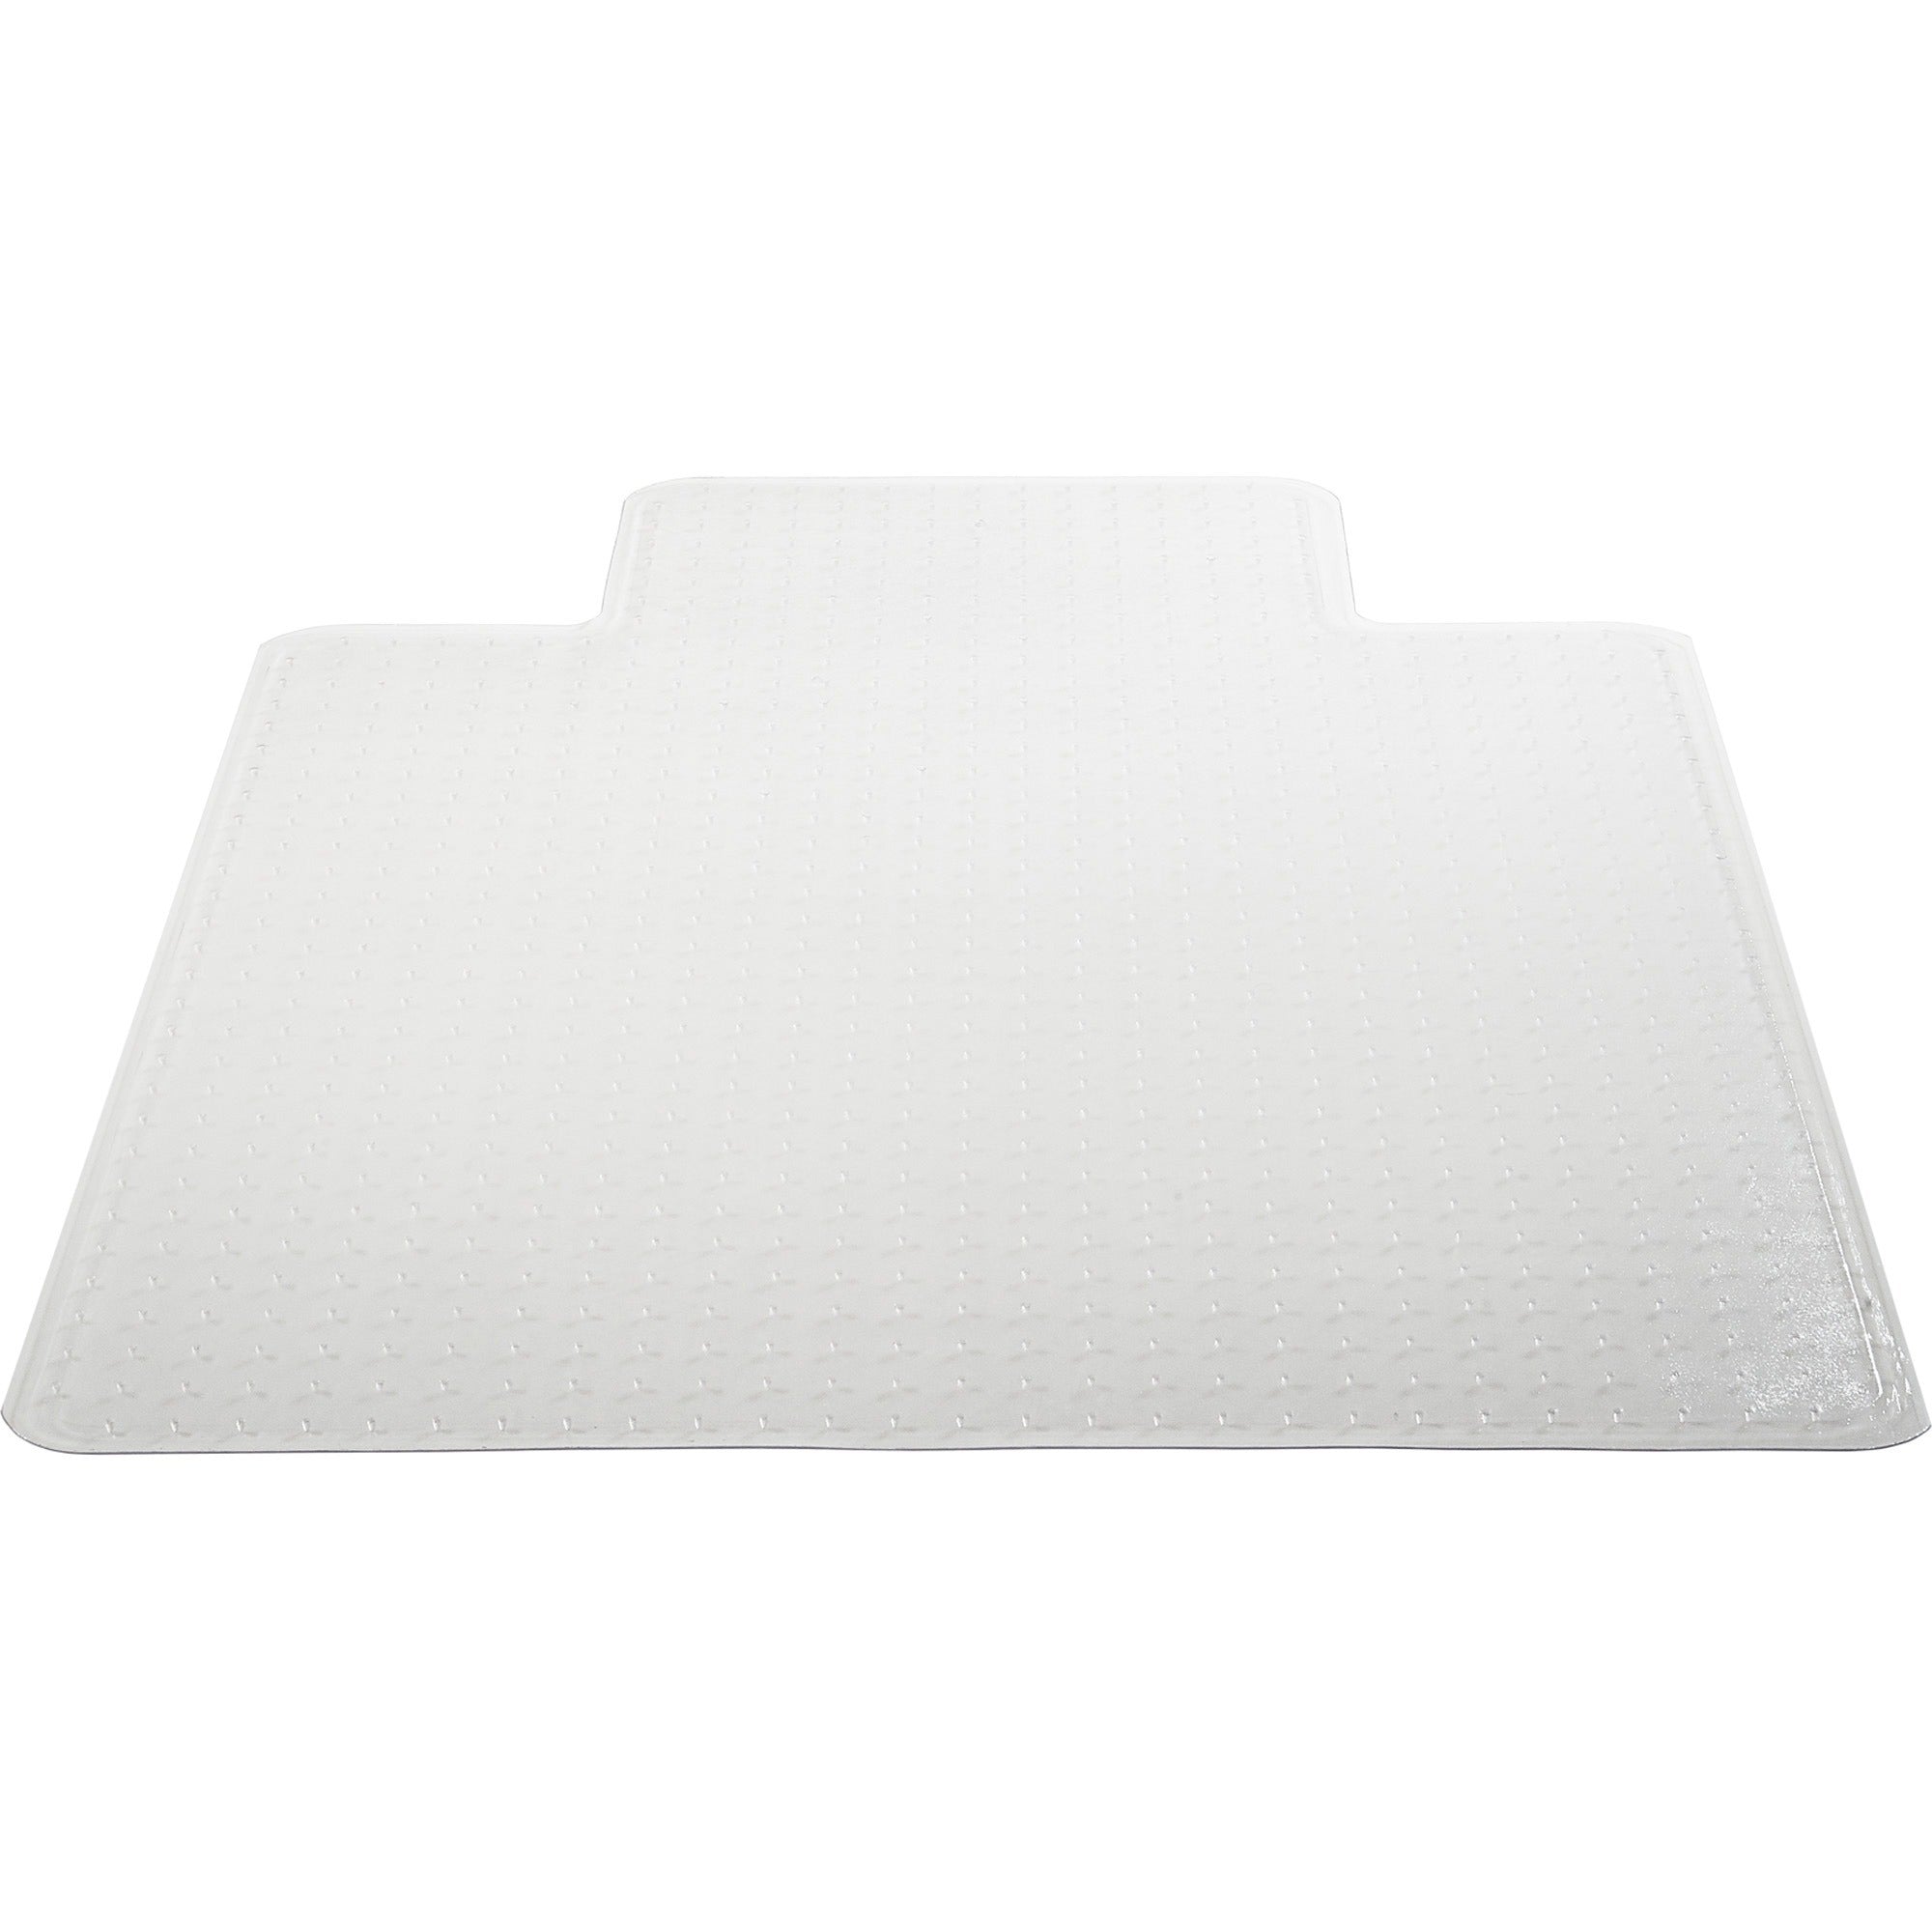 Lorell Standard Lip Low-pile Chairmat - Carpeted Floor - 48" Length x 36" Width x 0.122" Thickness - Lip Size 10" Length x 19" Width - Vinyl - Clear - 1Each - 